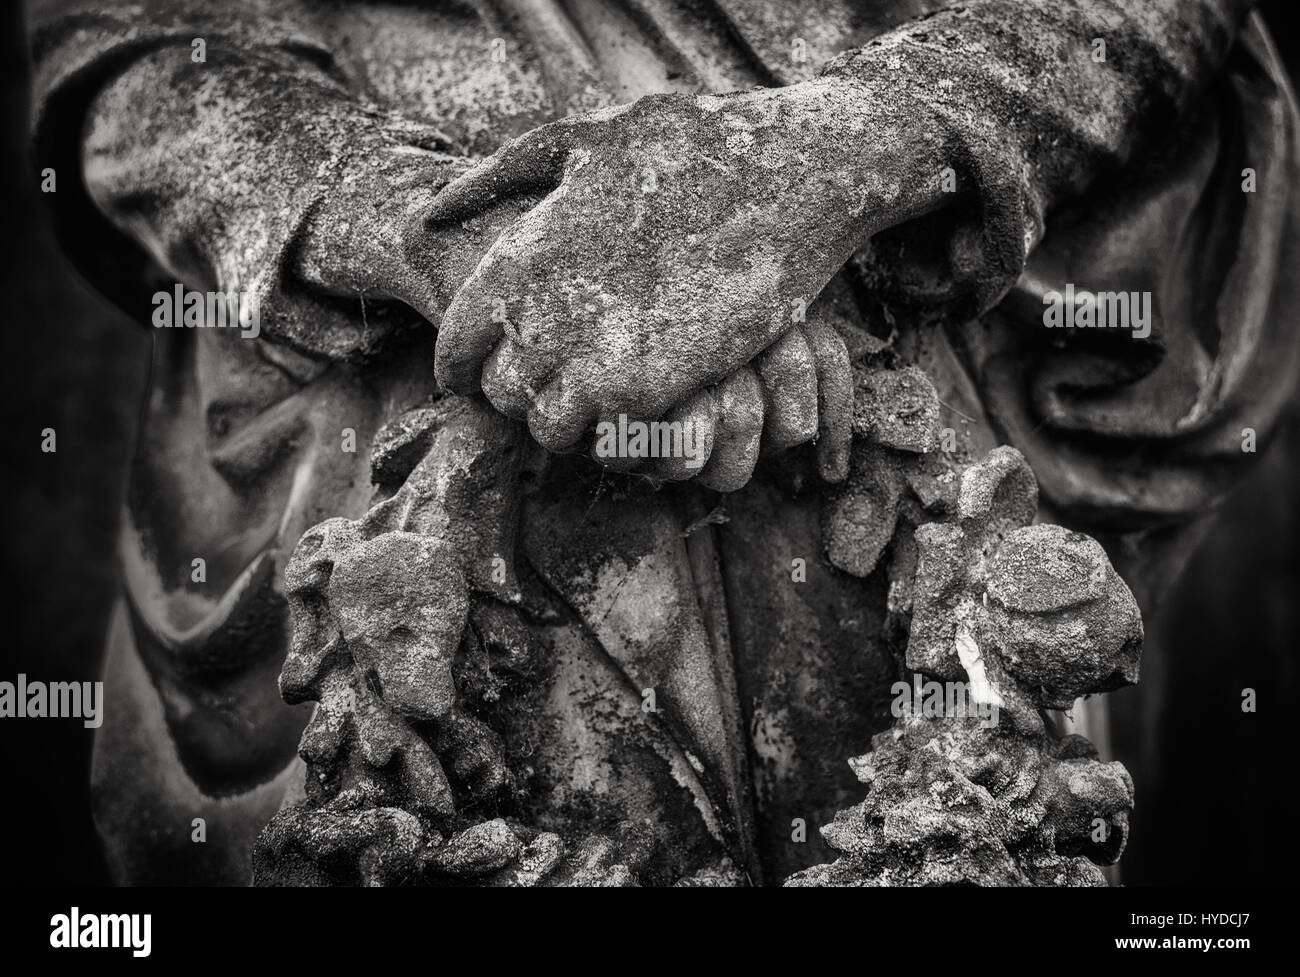 Crossed hands of an angel statue holding a wreath in black and white Stock Photo